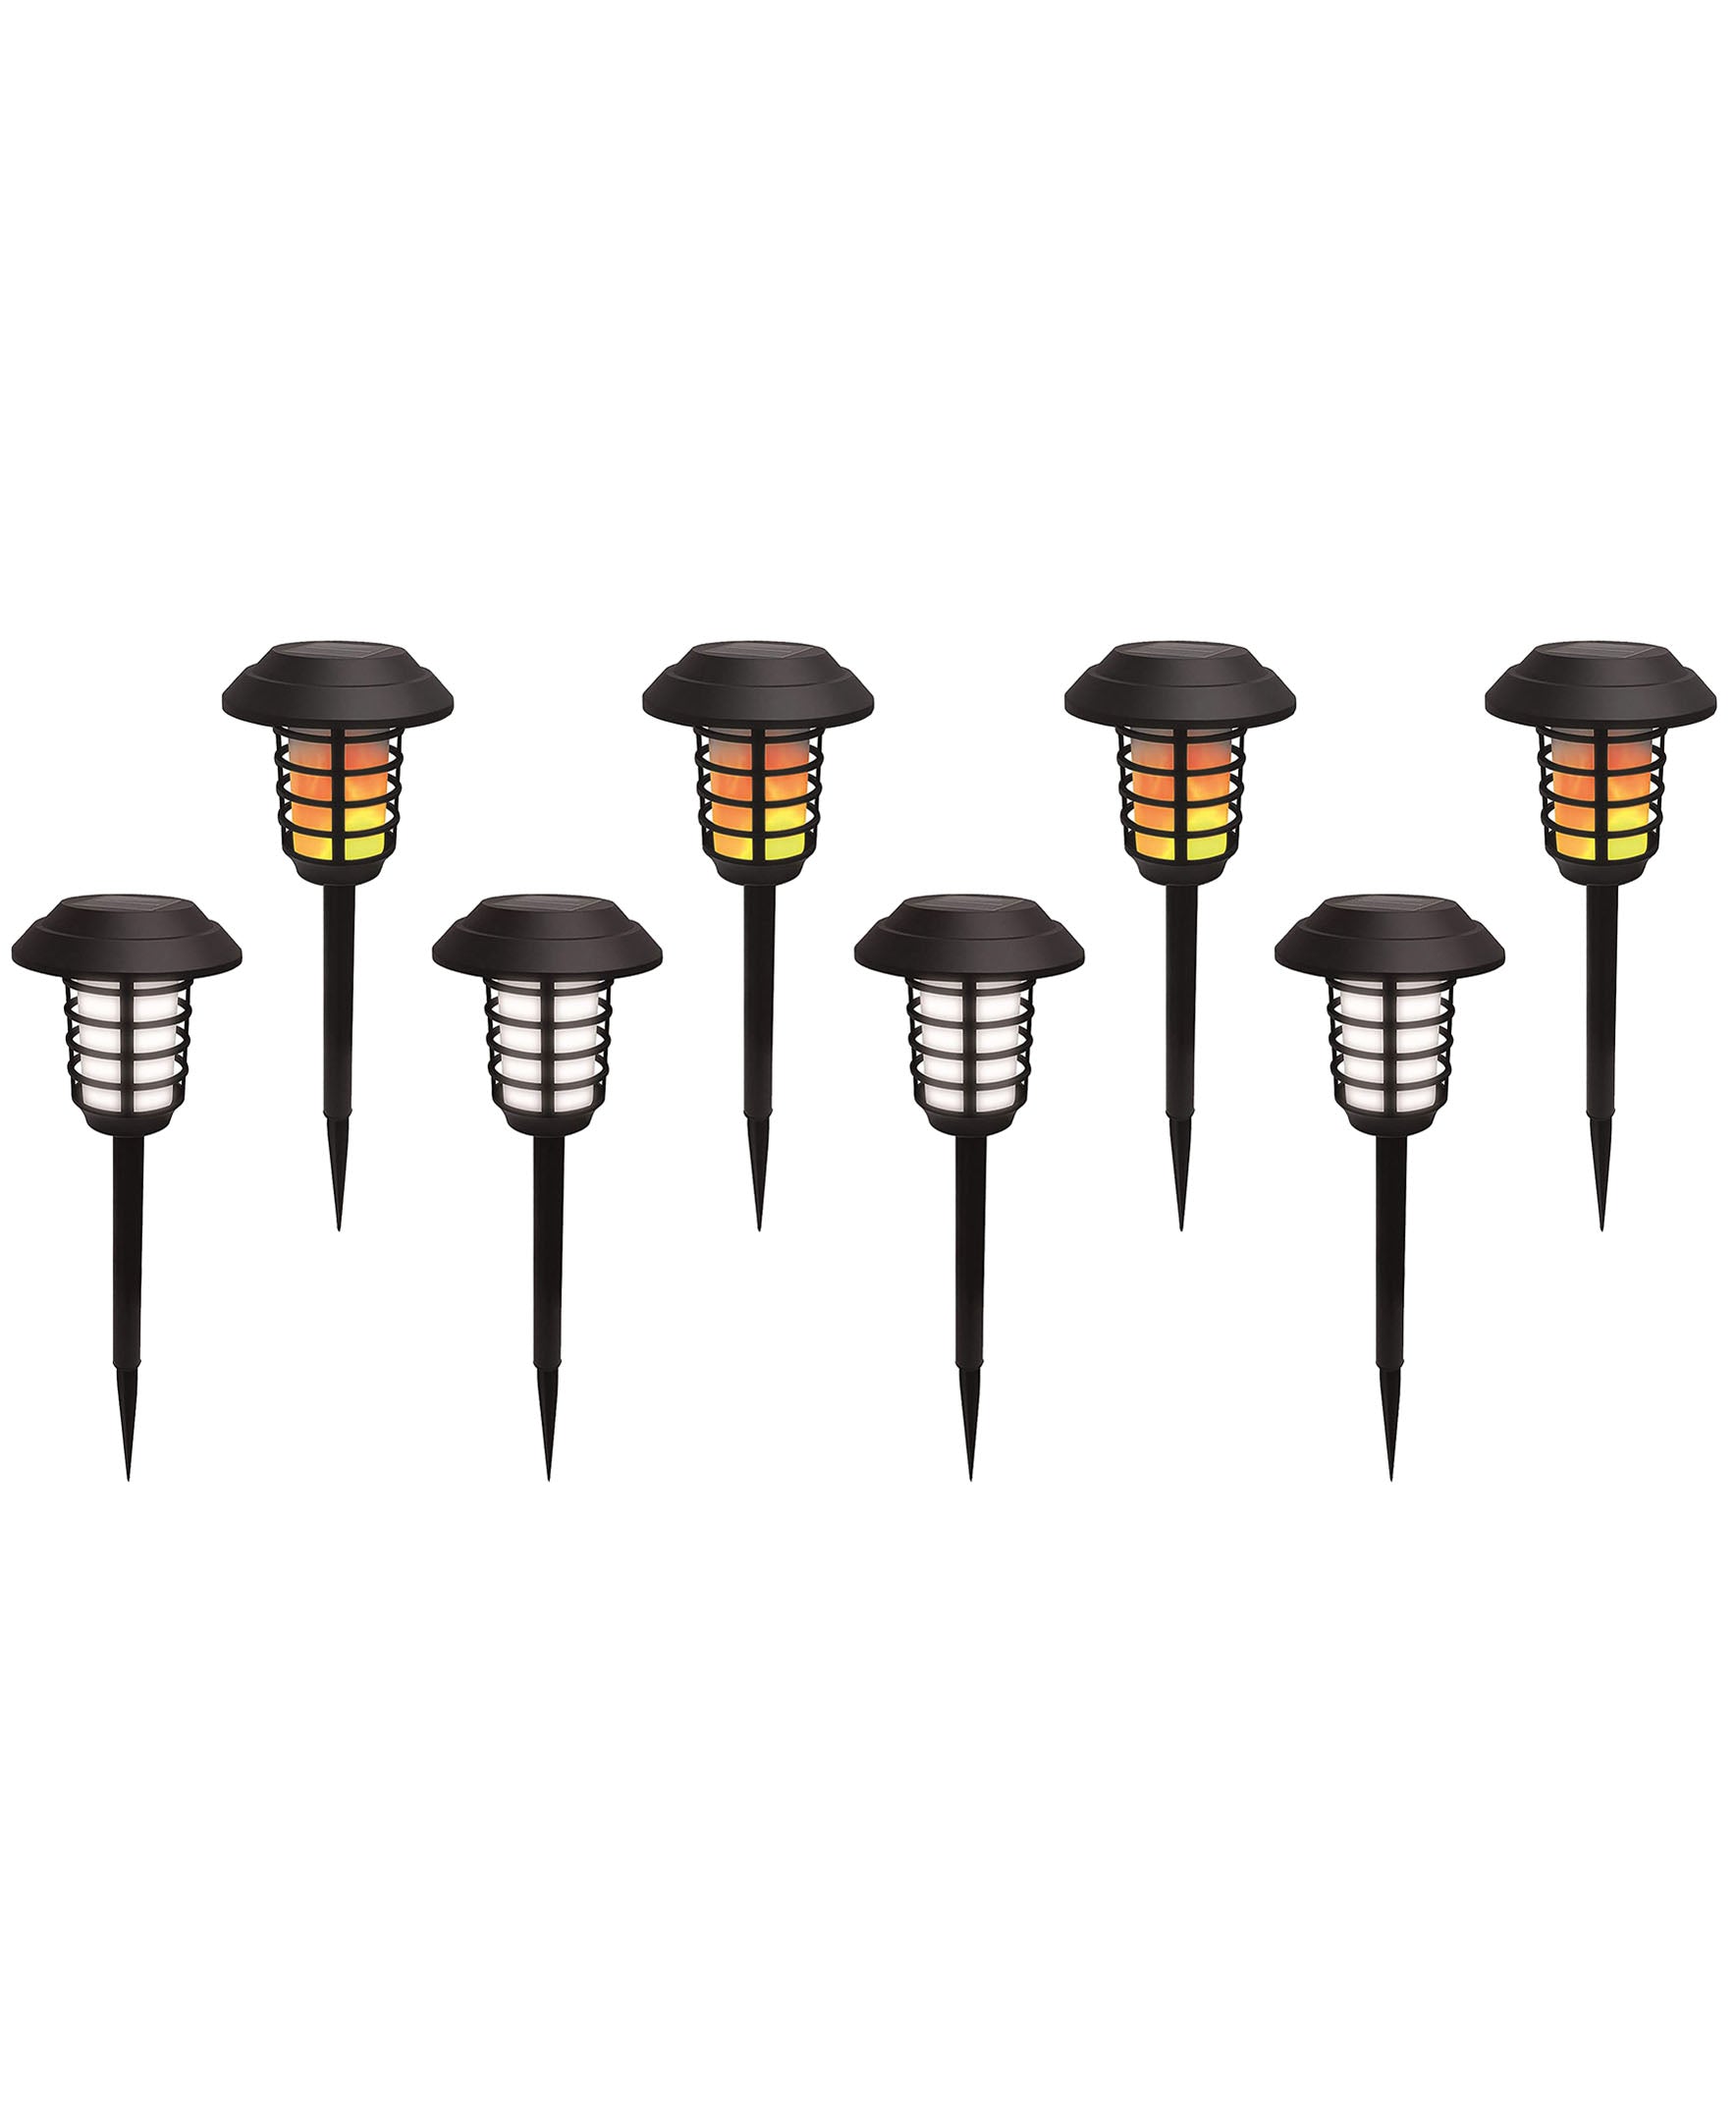 Bell + Howell 8-Pack 2-in-1 Flickering Flame Solar Pathway Lights